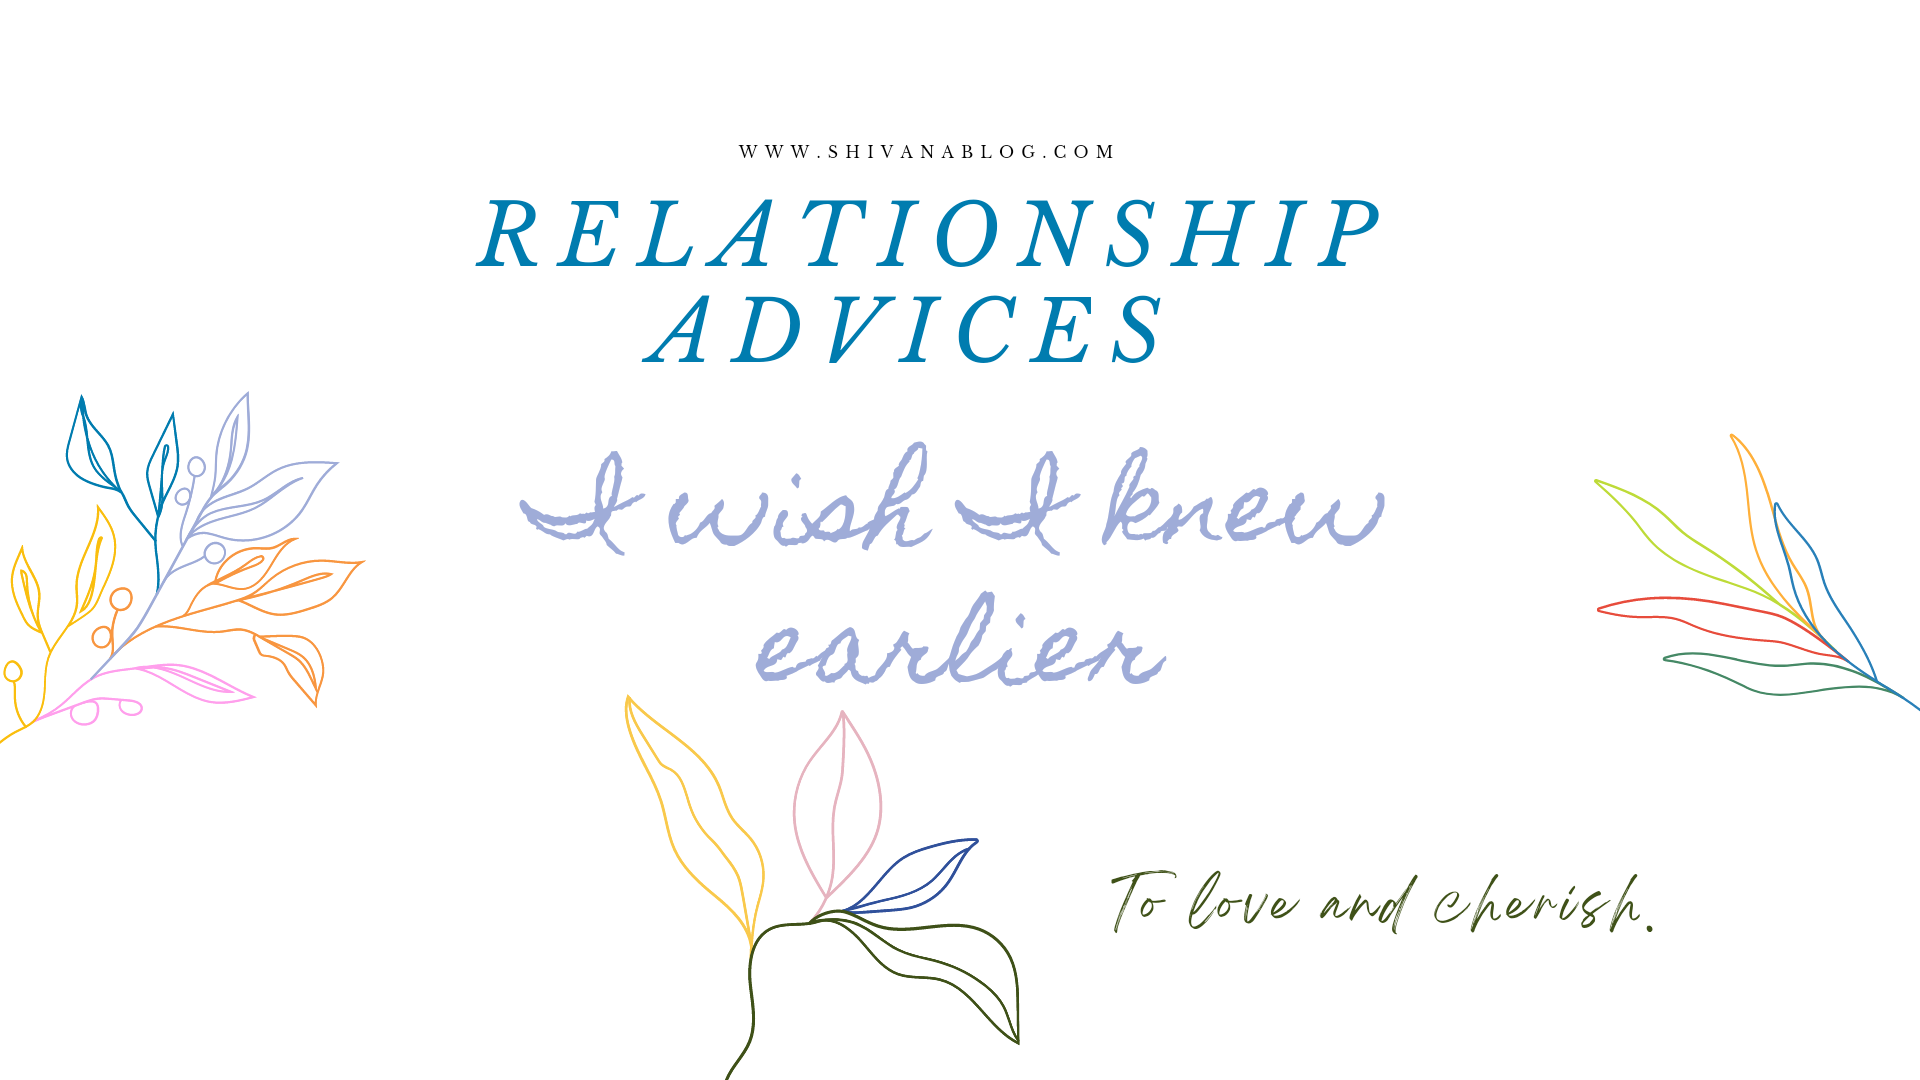 Relationship Advices - I wish I knew earlier